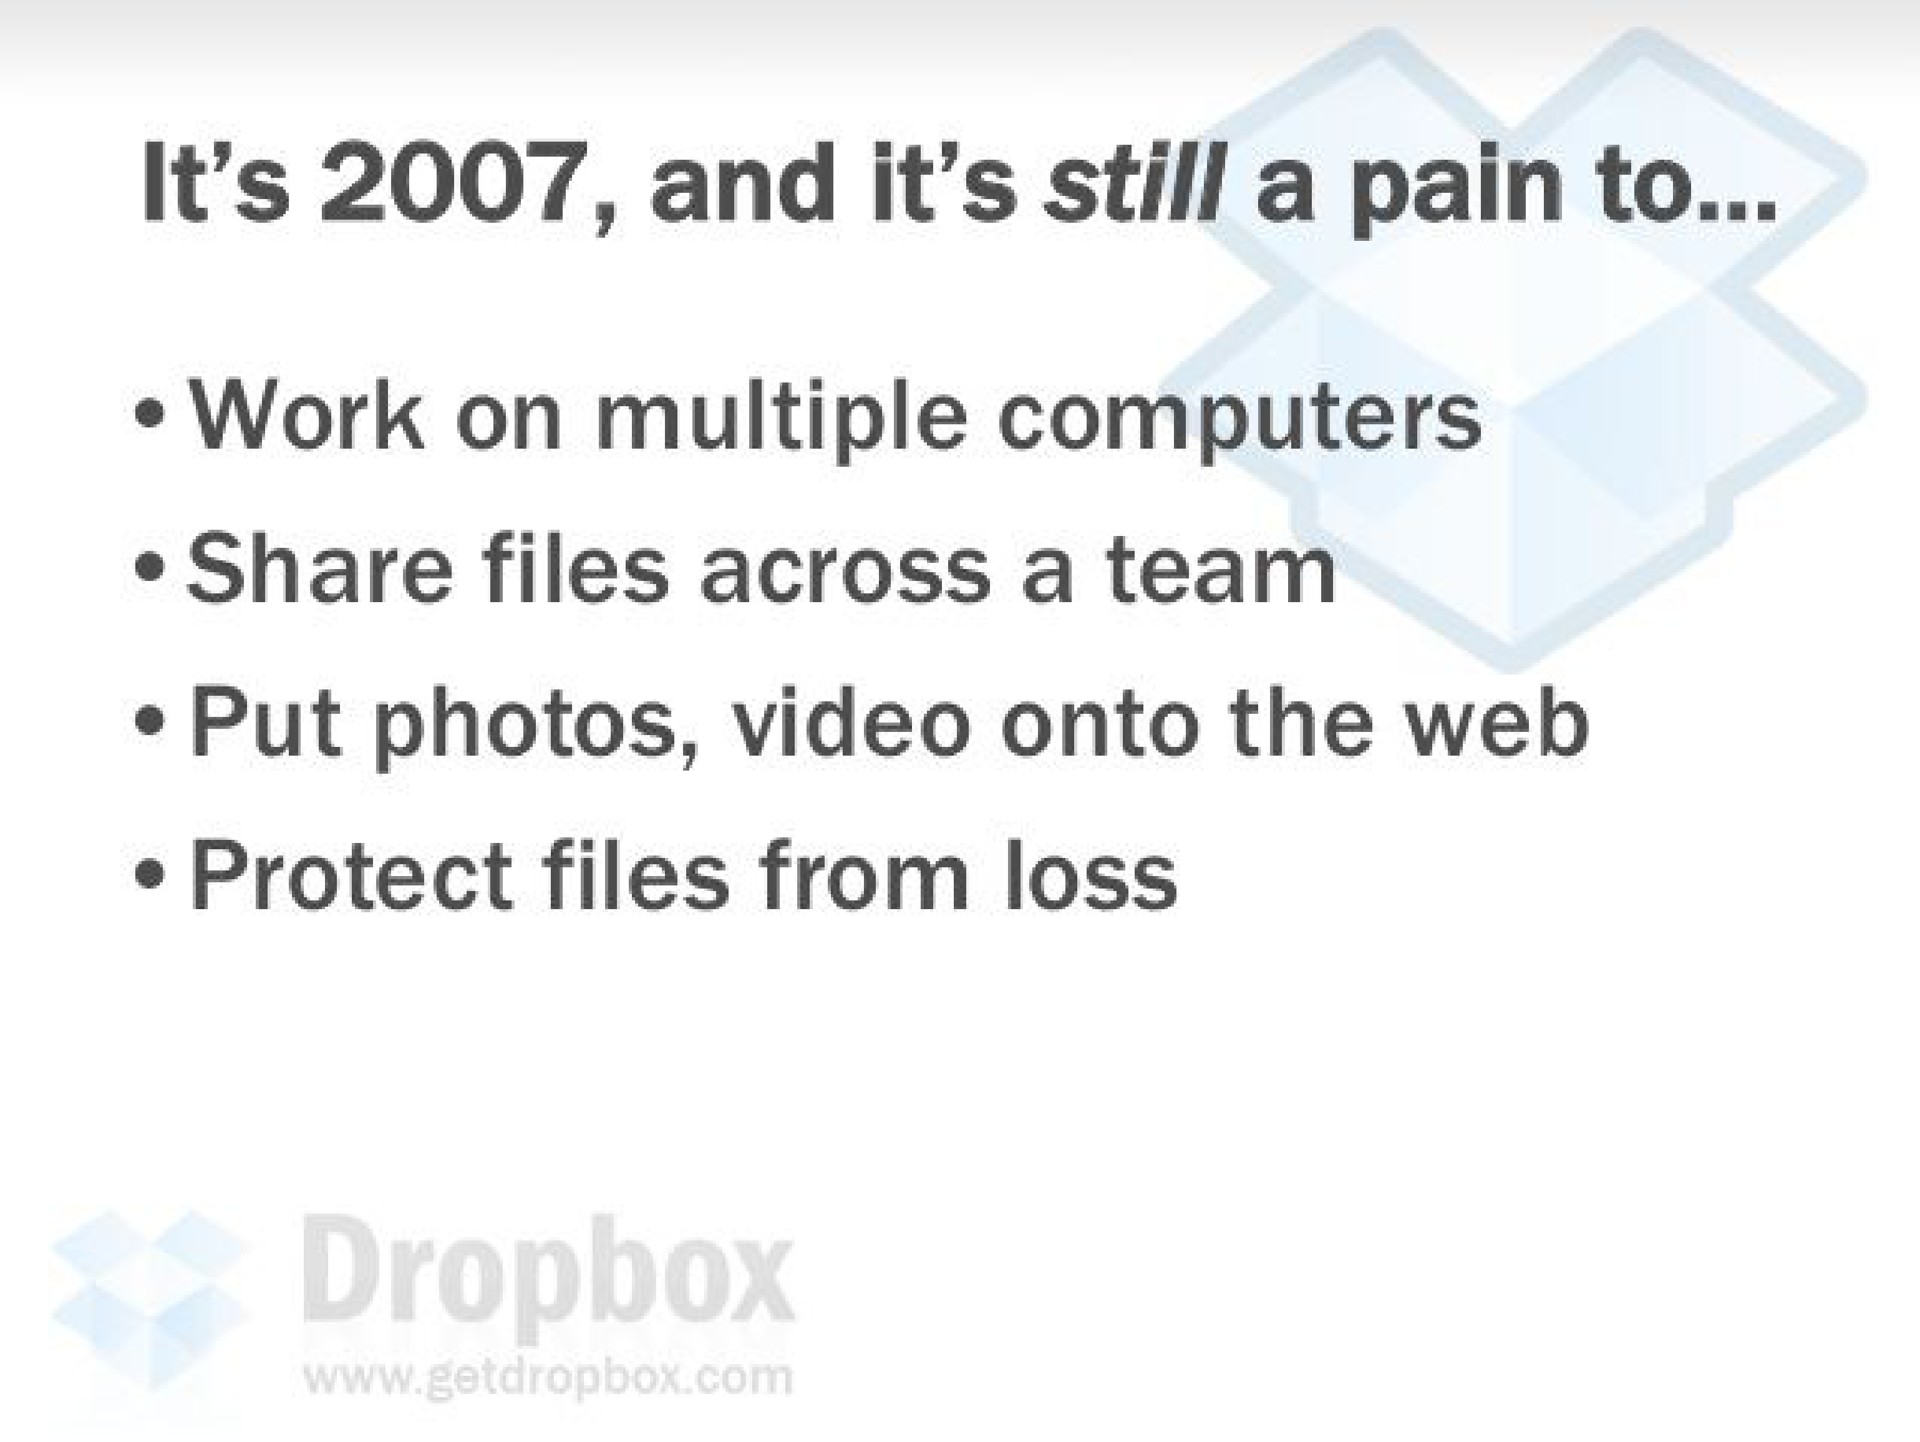 it and it still a pain to work on multiple computers share files across a team put photos video onto the web protect files from loss | Dropbox